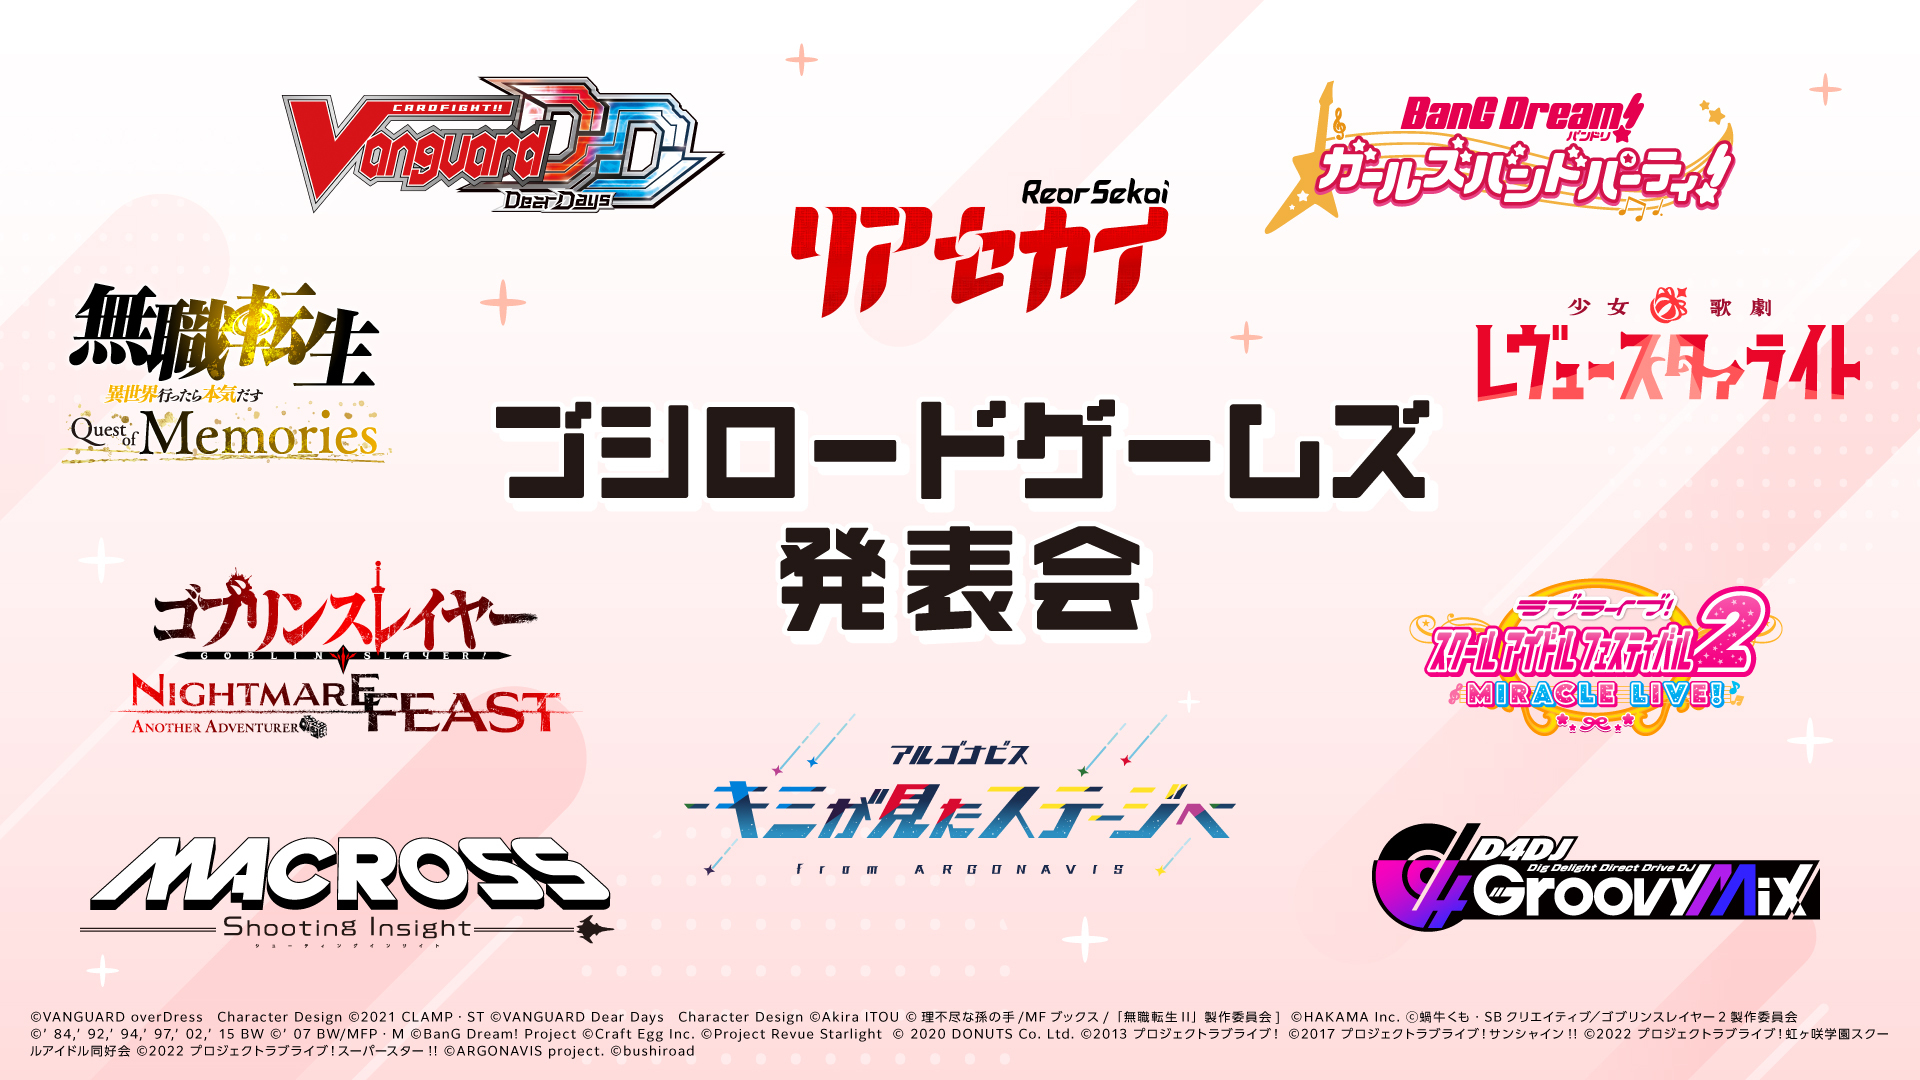 Bushiroad announces product release updates for 2023 and Q1 2024